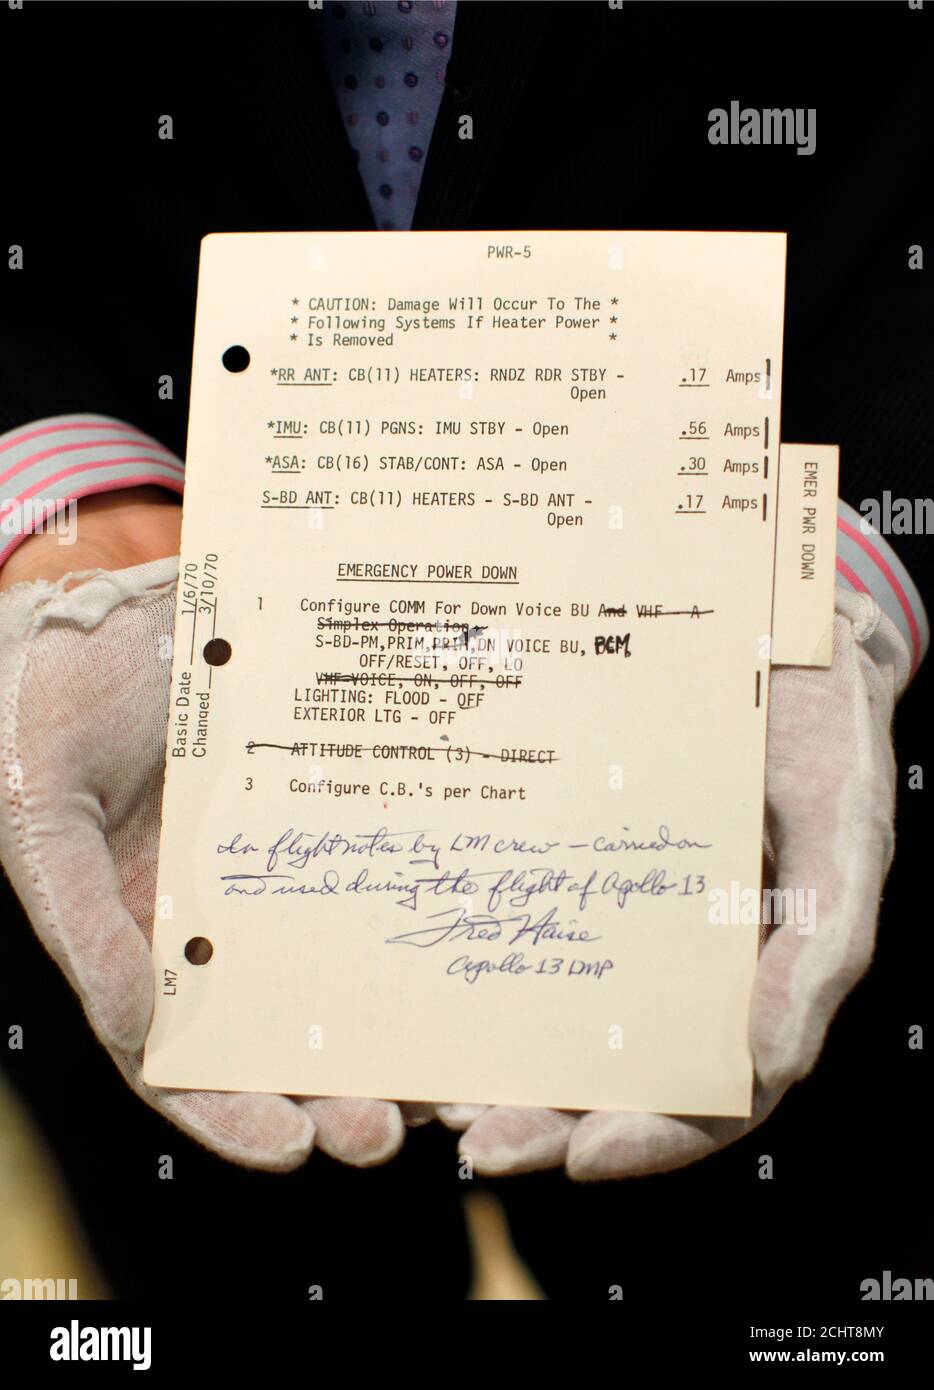 The emergency check list from Apollo 13 signed by lunar module pilot Fred Haise is shown at Bonham's Auction house in New York, April 9, 2010. Bonham's will host the Space History Sale April 13, 2010.  REUTERS/Brendan McDermid (UNITED STATES - Tags: SCI TECH SOCIETY) Stock Photo